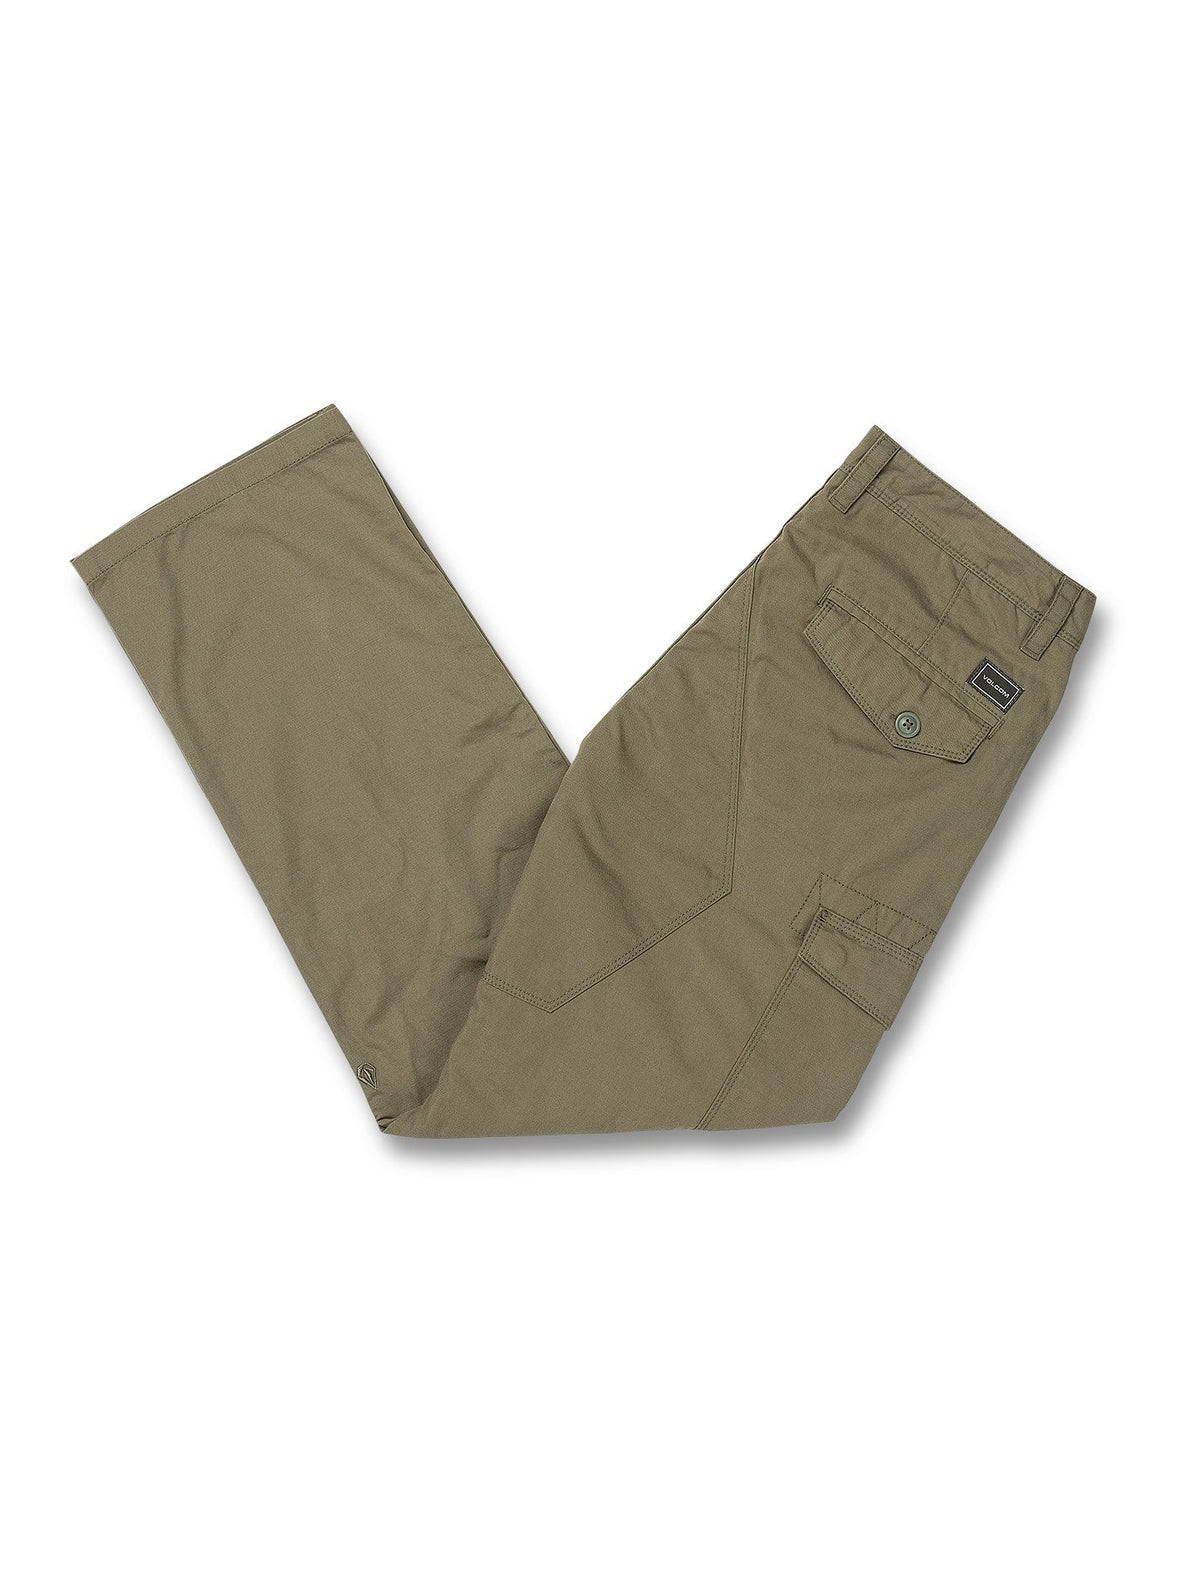 Miter Ii Cargo Pant - Army Green Combo (A1111906_ARC) [B]